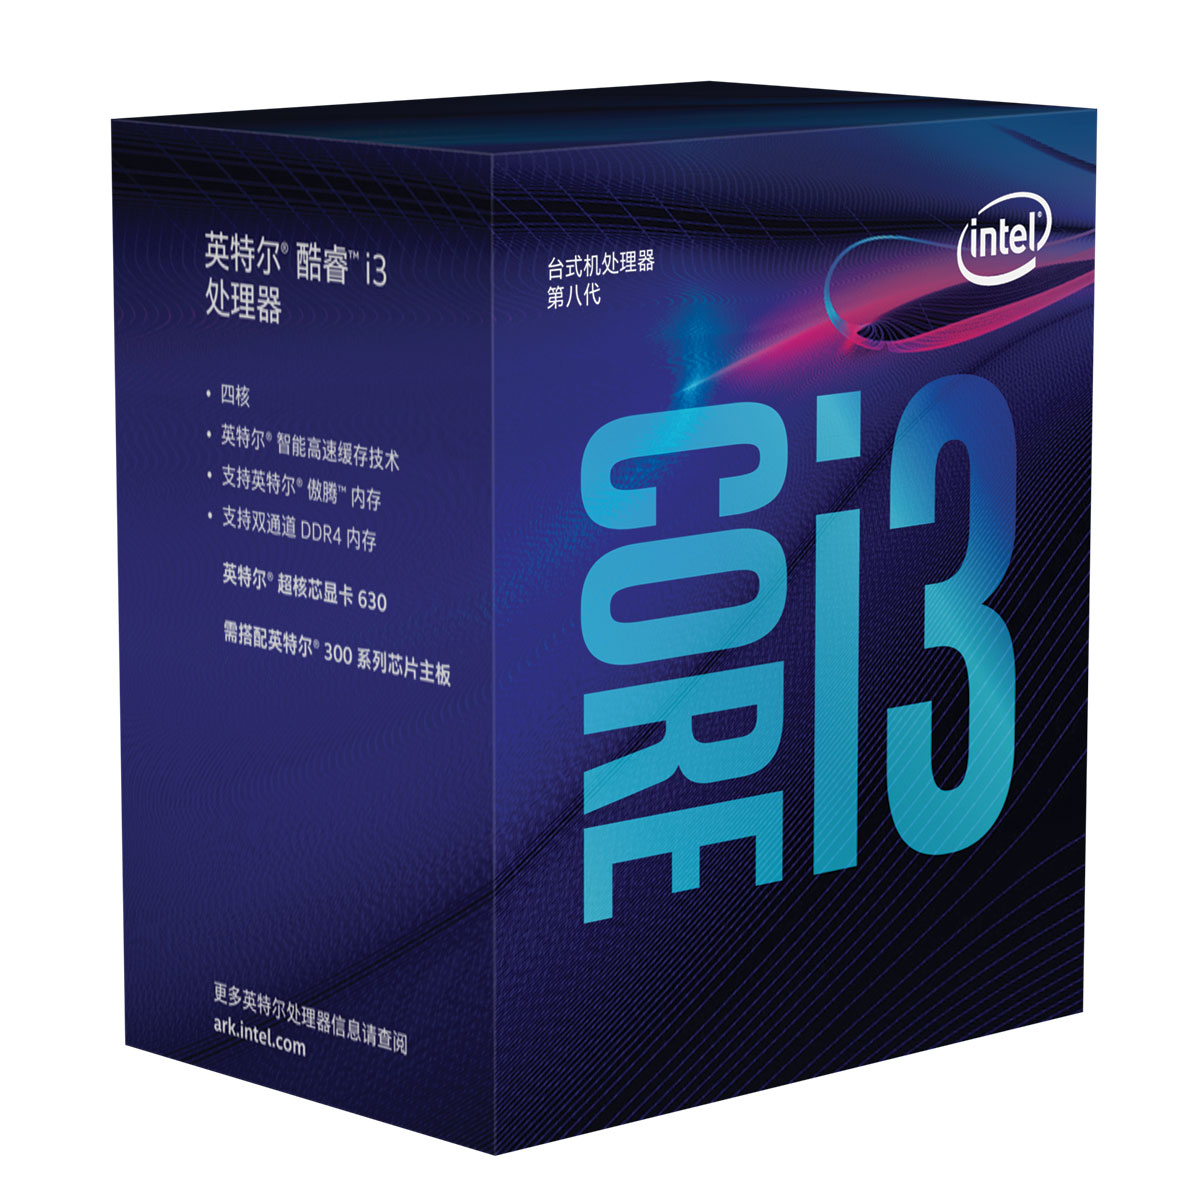 Core i3-8100 (3.6 GHz)